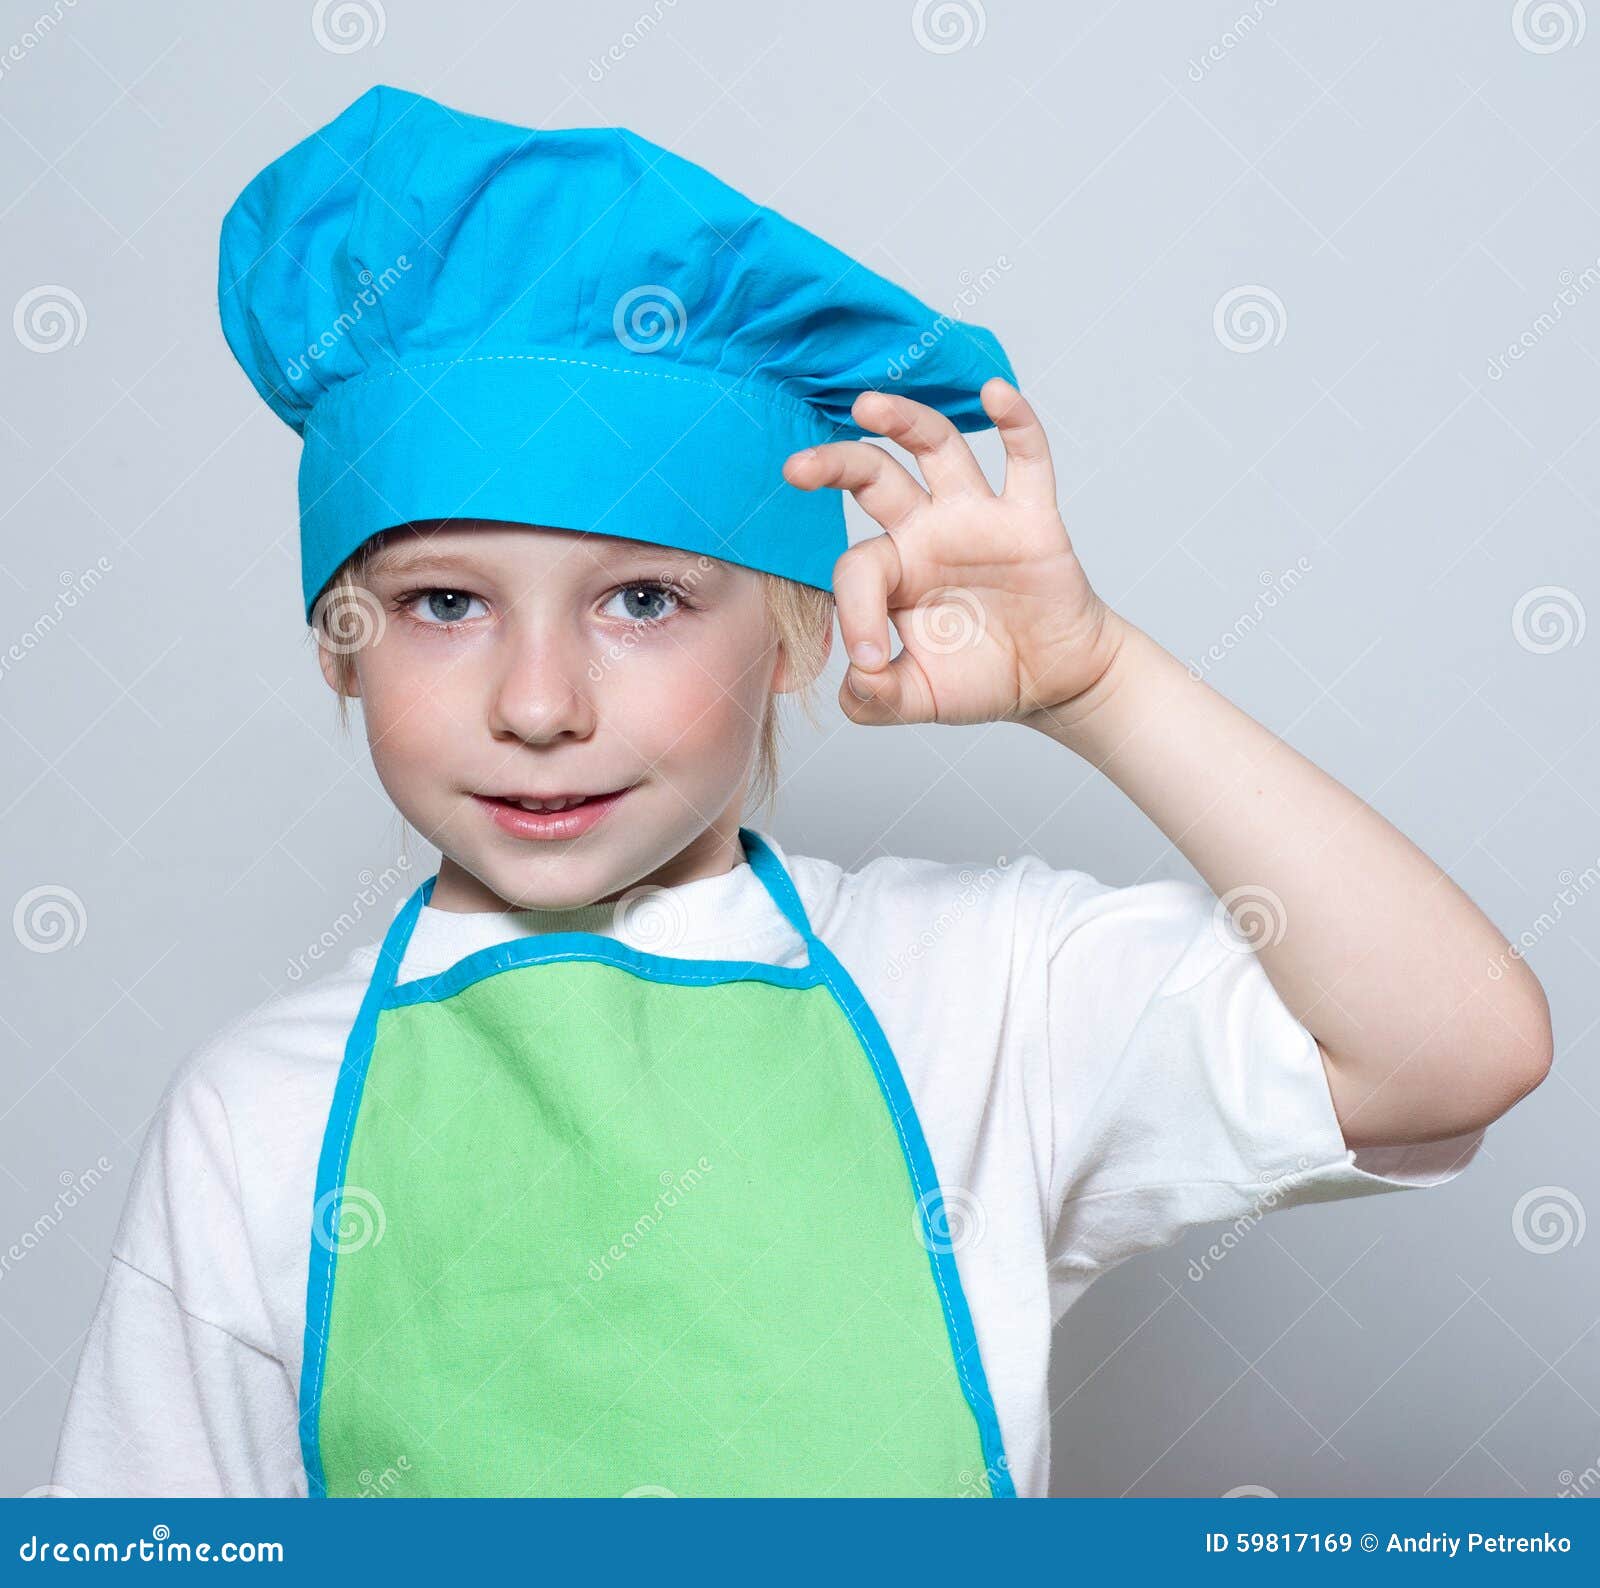 Child as a chef cook stock image. Image of cute, checkered - 59817169